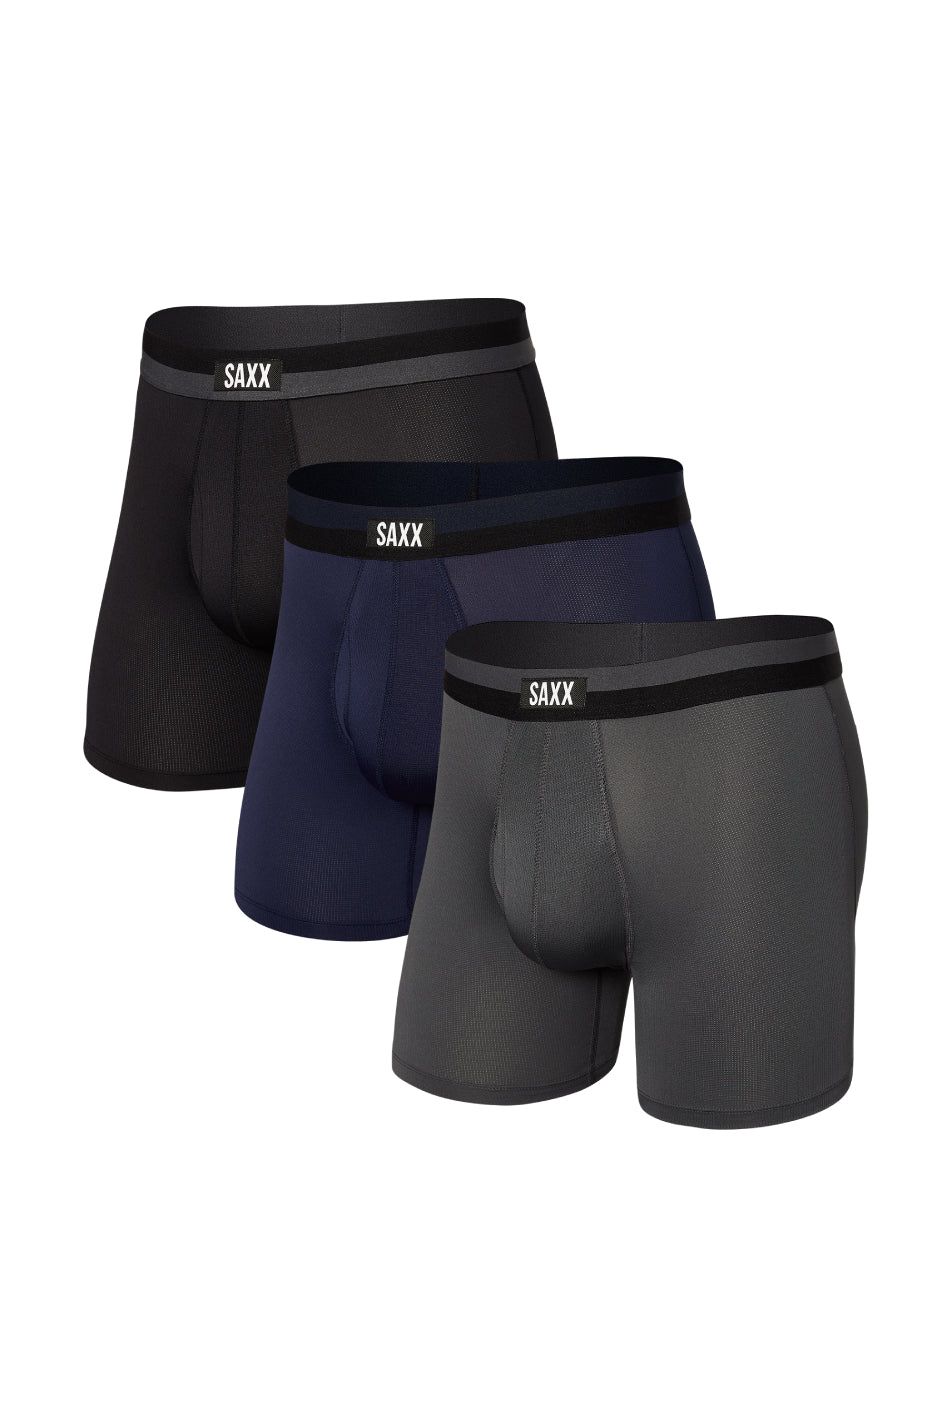 SAXX 3 Pack Men's Sport Mesh Fly Boxer Brief